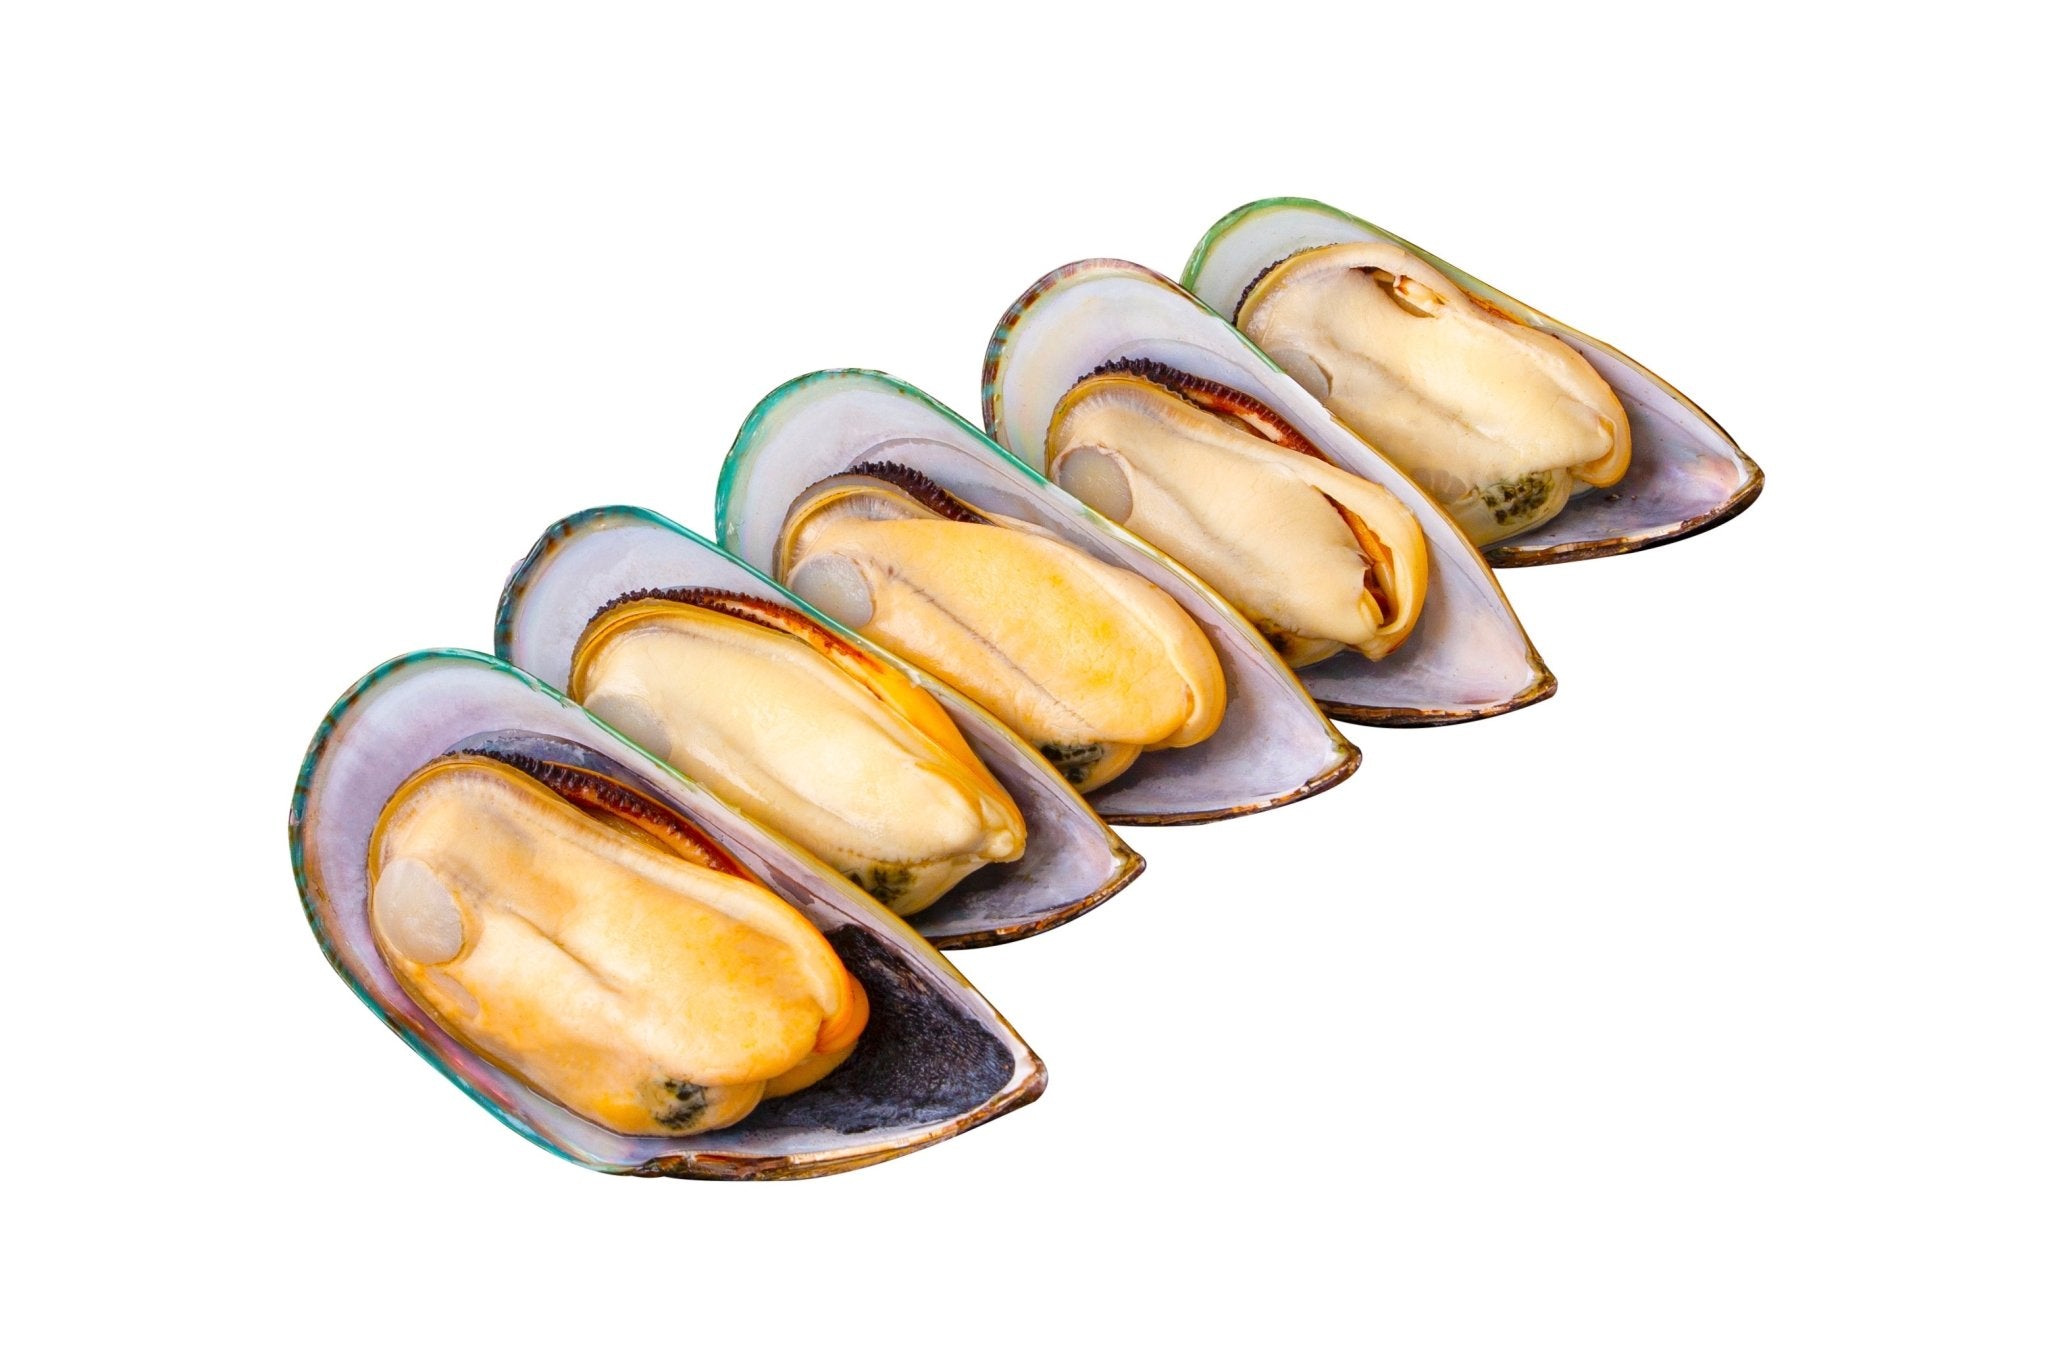 Green-lipped mussel for dog joints: benefits, dosage & side effects